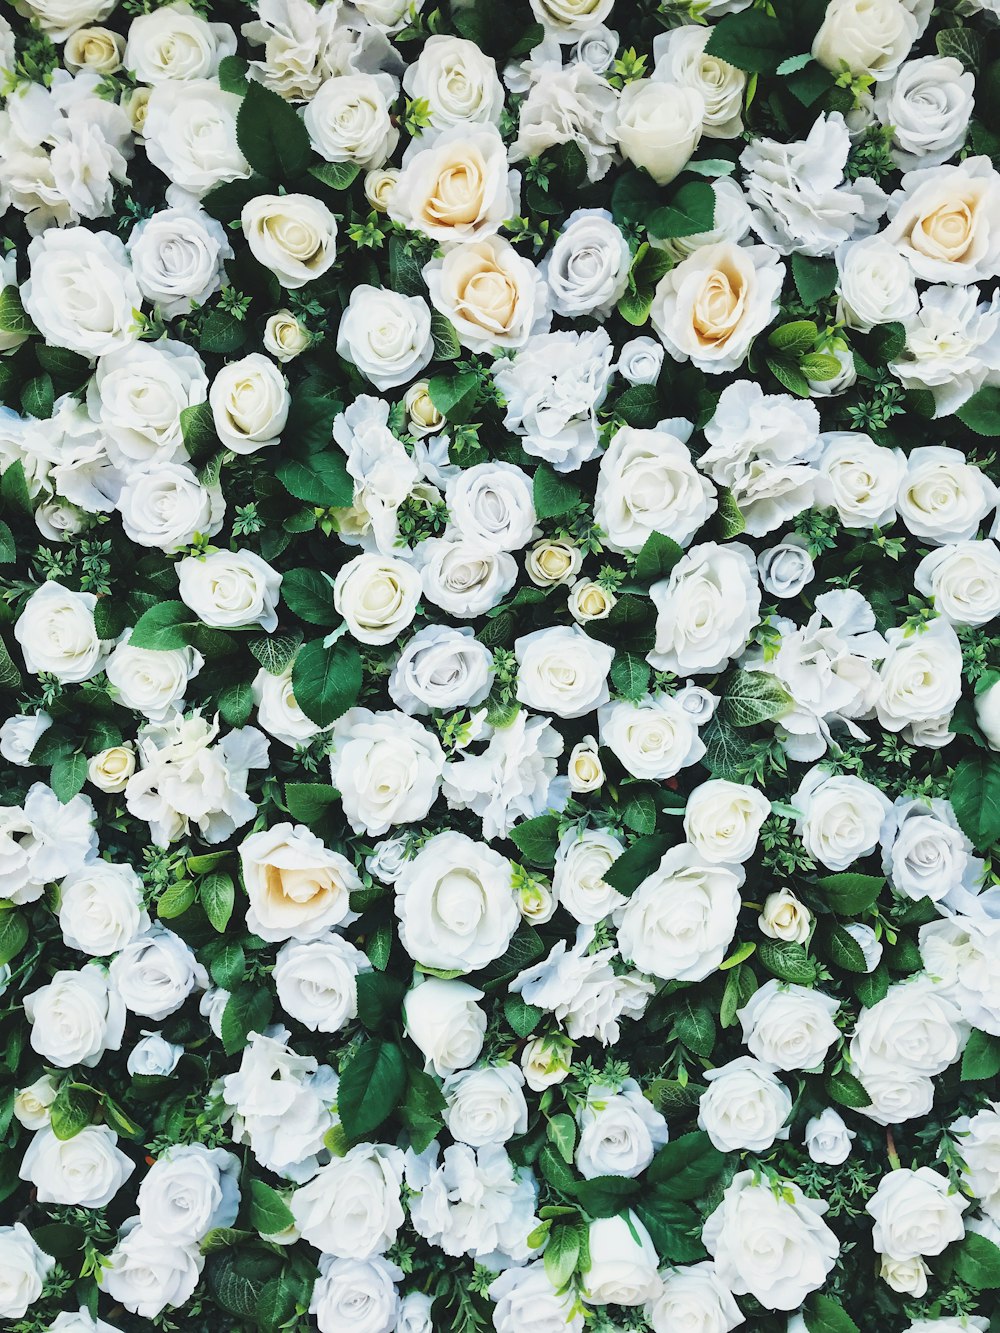 550+ Flower Wall Pictures | Download Free Images on Unsplash